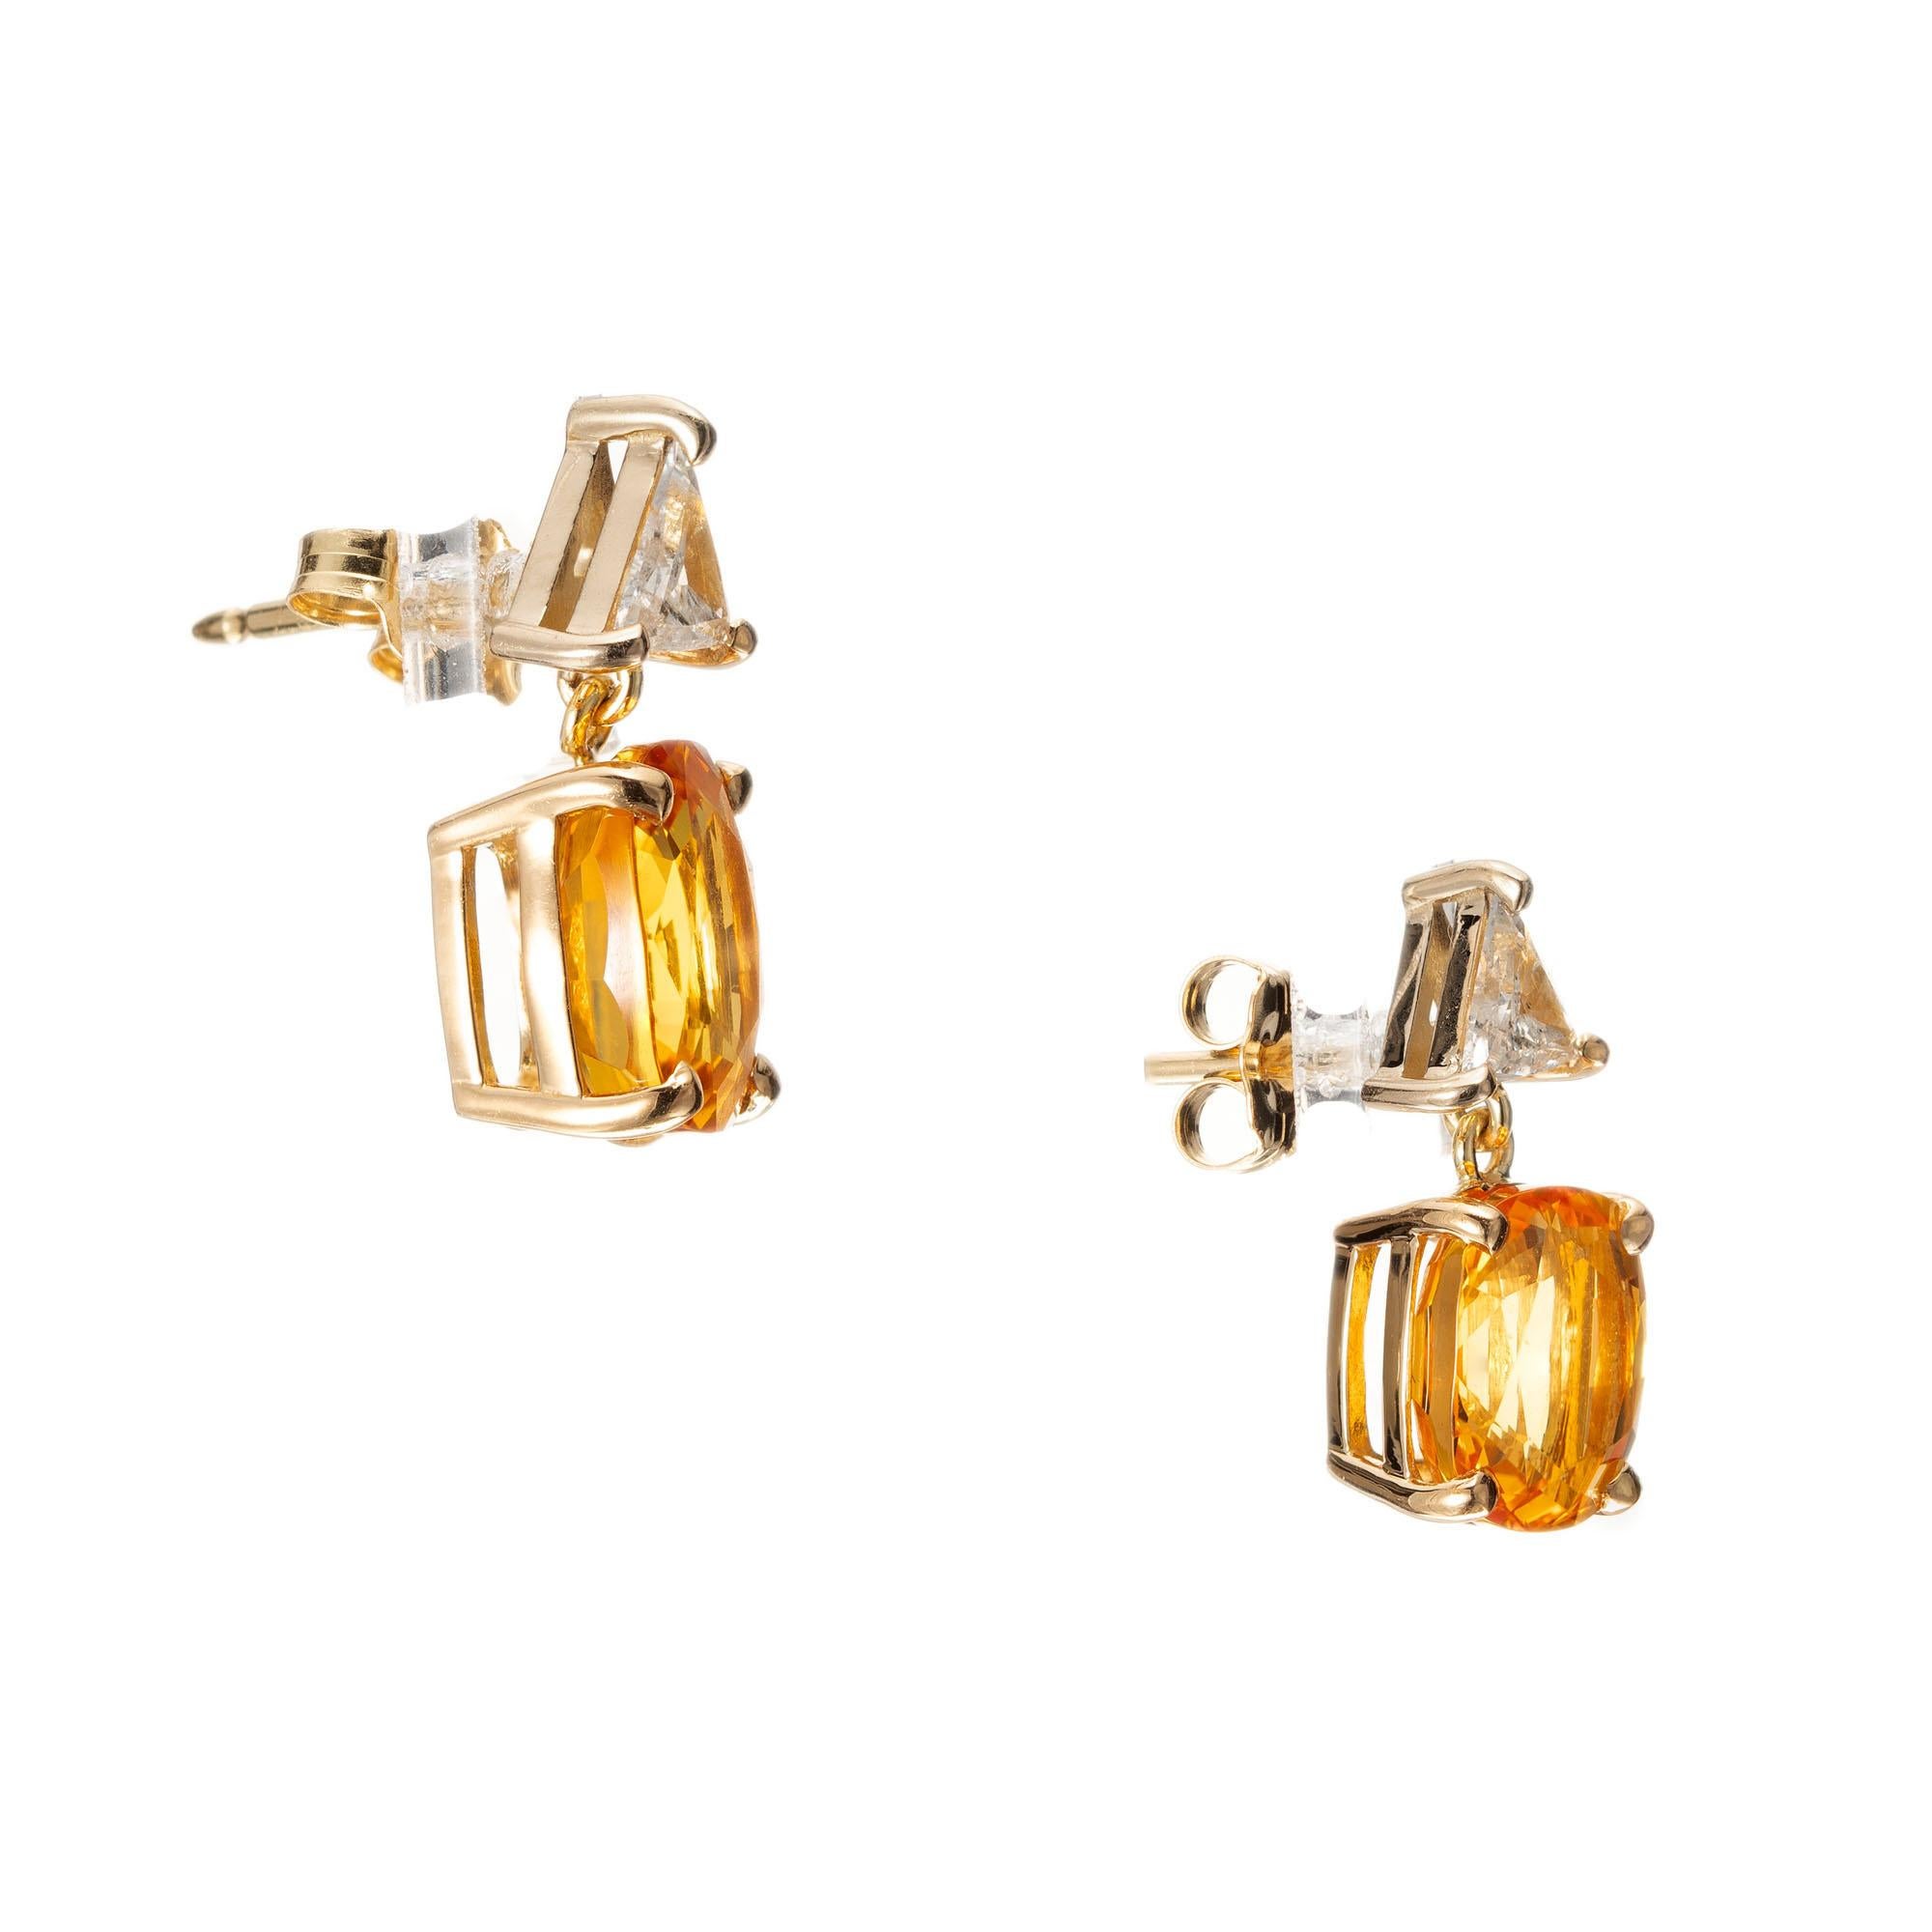 GIA certified sapphire and diamond dangle earrings. 2 Cushion cut orange yellow sapphires. Beryllium treated for a bright orange yellow color. Accented with 2 trilliant cut diamonds, in 18k yellow gold settings. Created in the Peter Suchy Workshop.